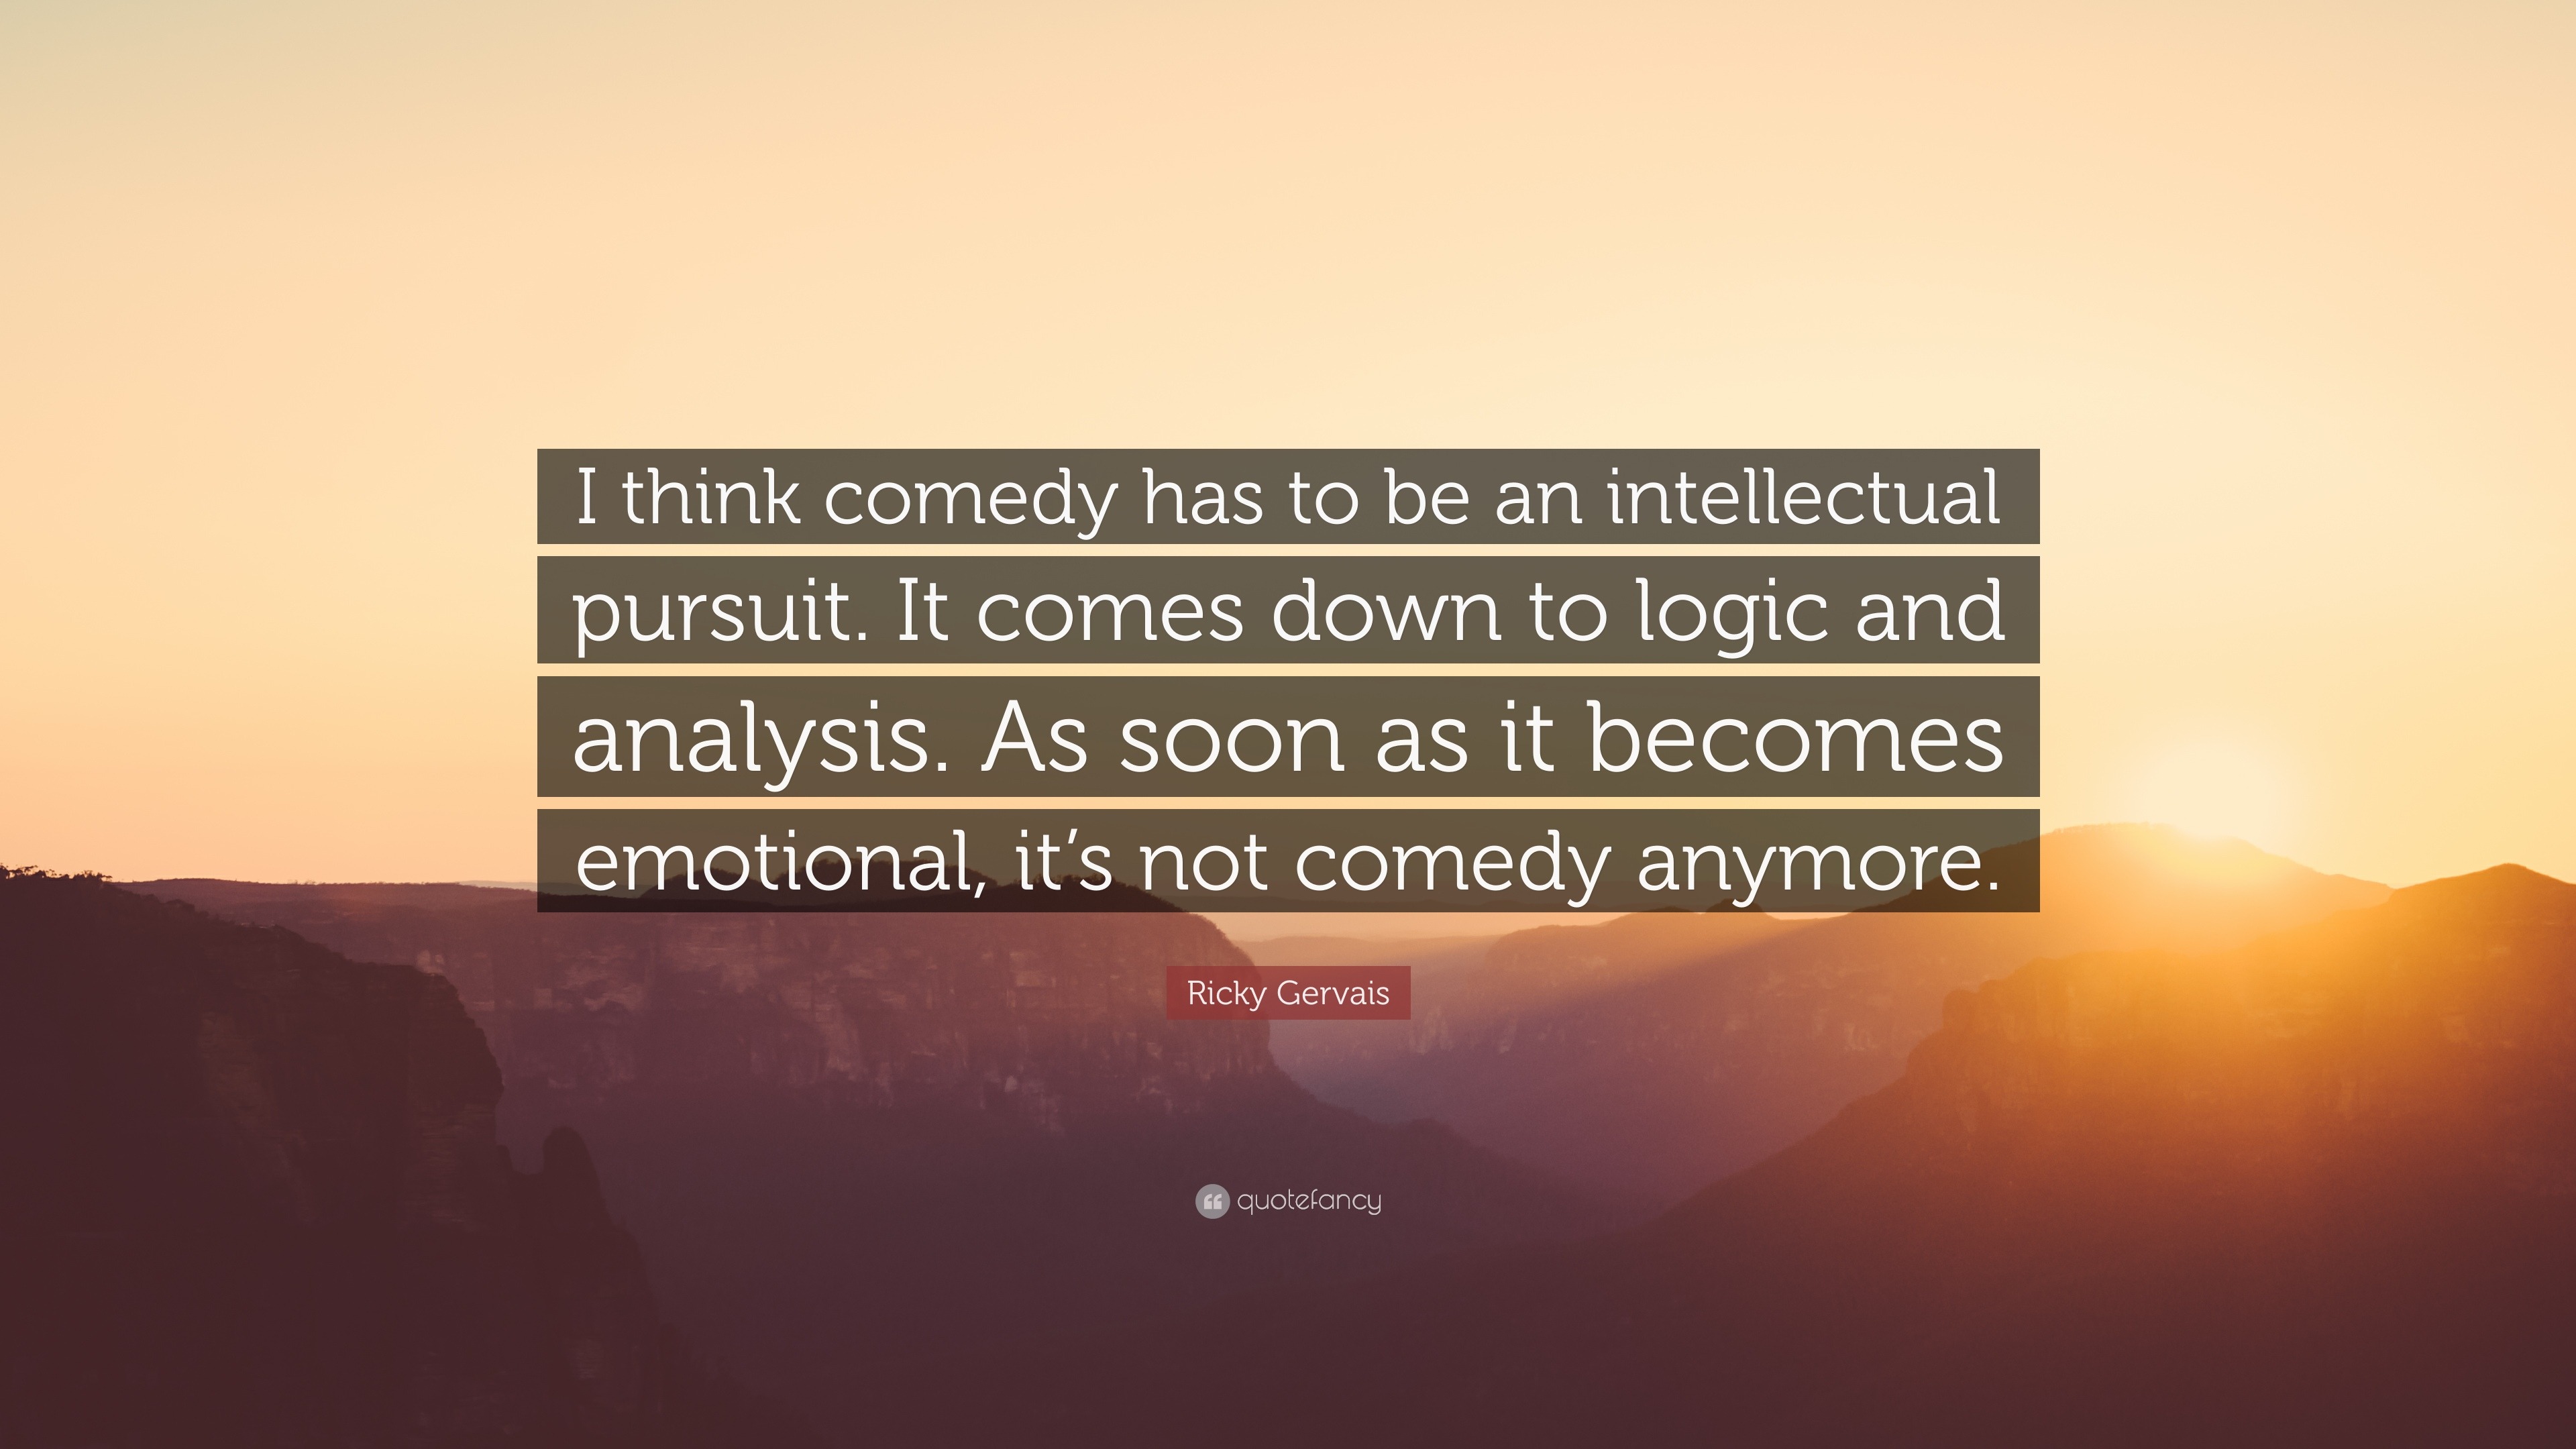 Ricky Gervais Quote: “I think comedy has to be an intellectual pursuit ...